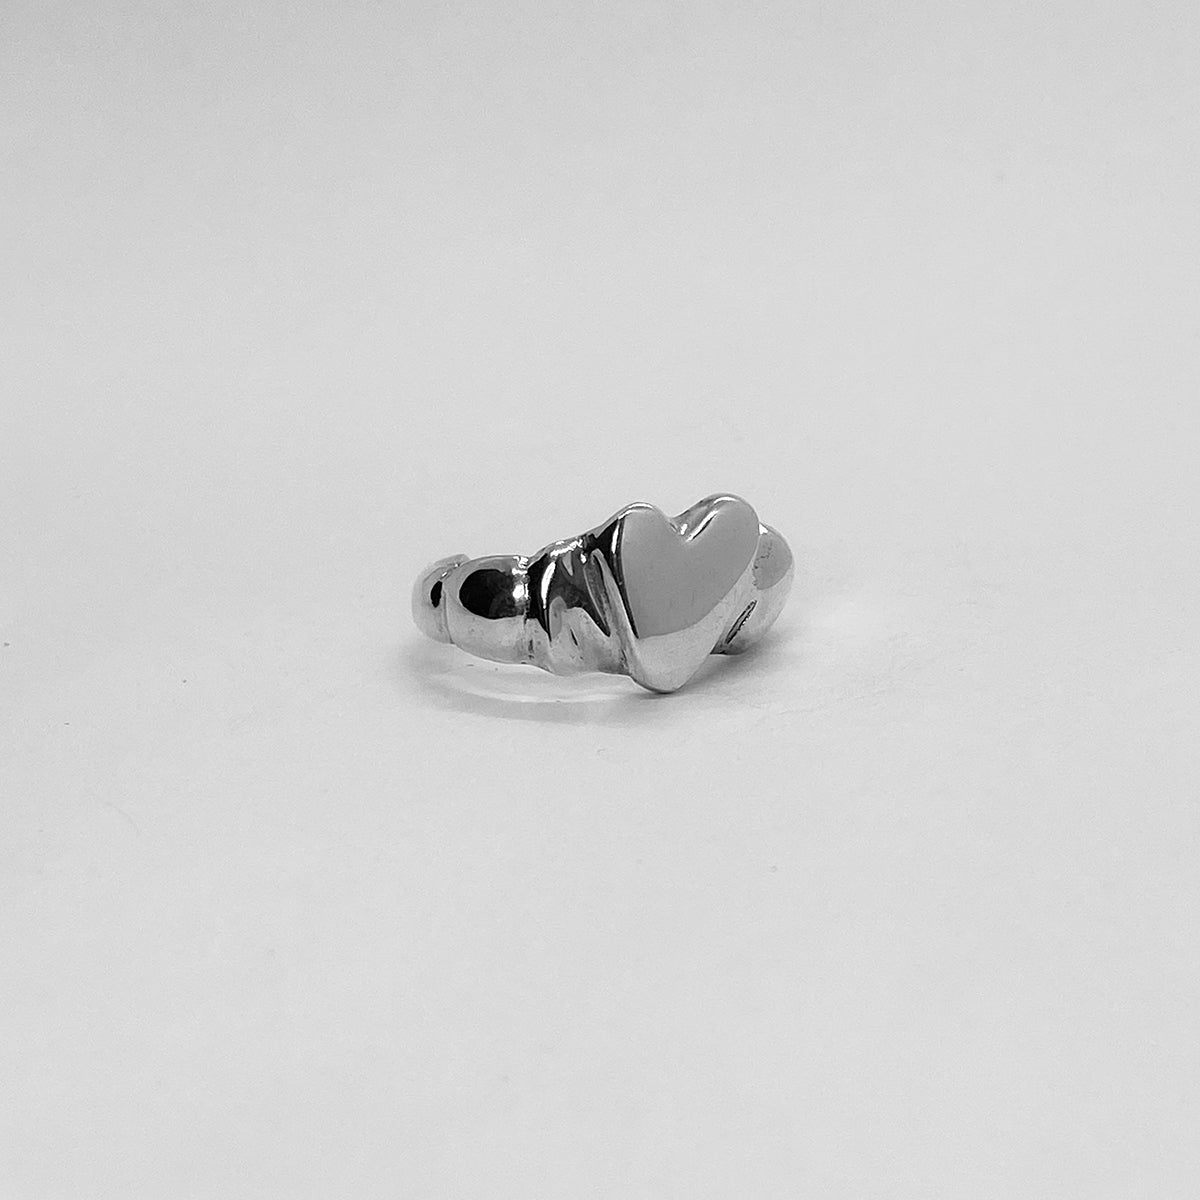 The Heart ring is a handmade piece made of 925 sterling silver. Its surface is glossy